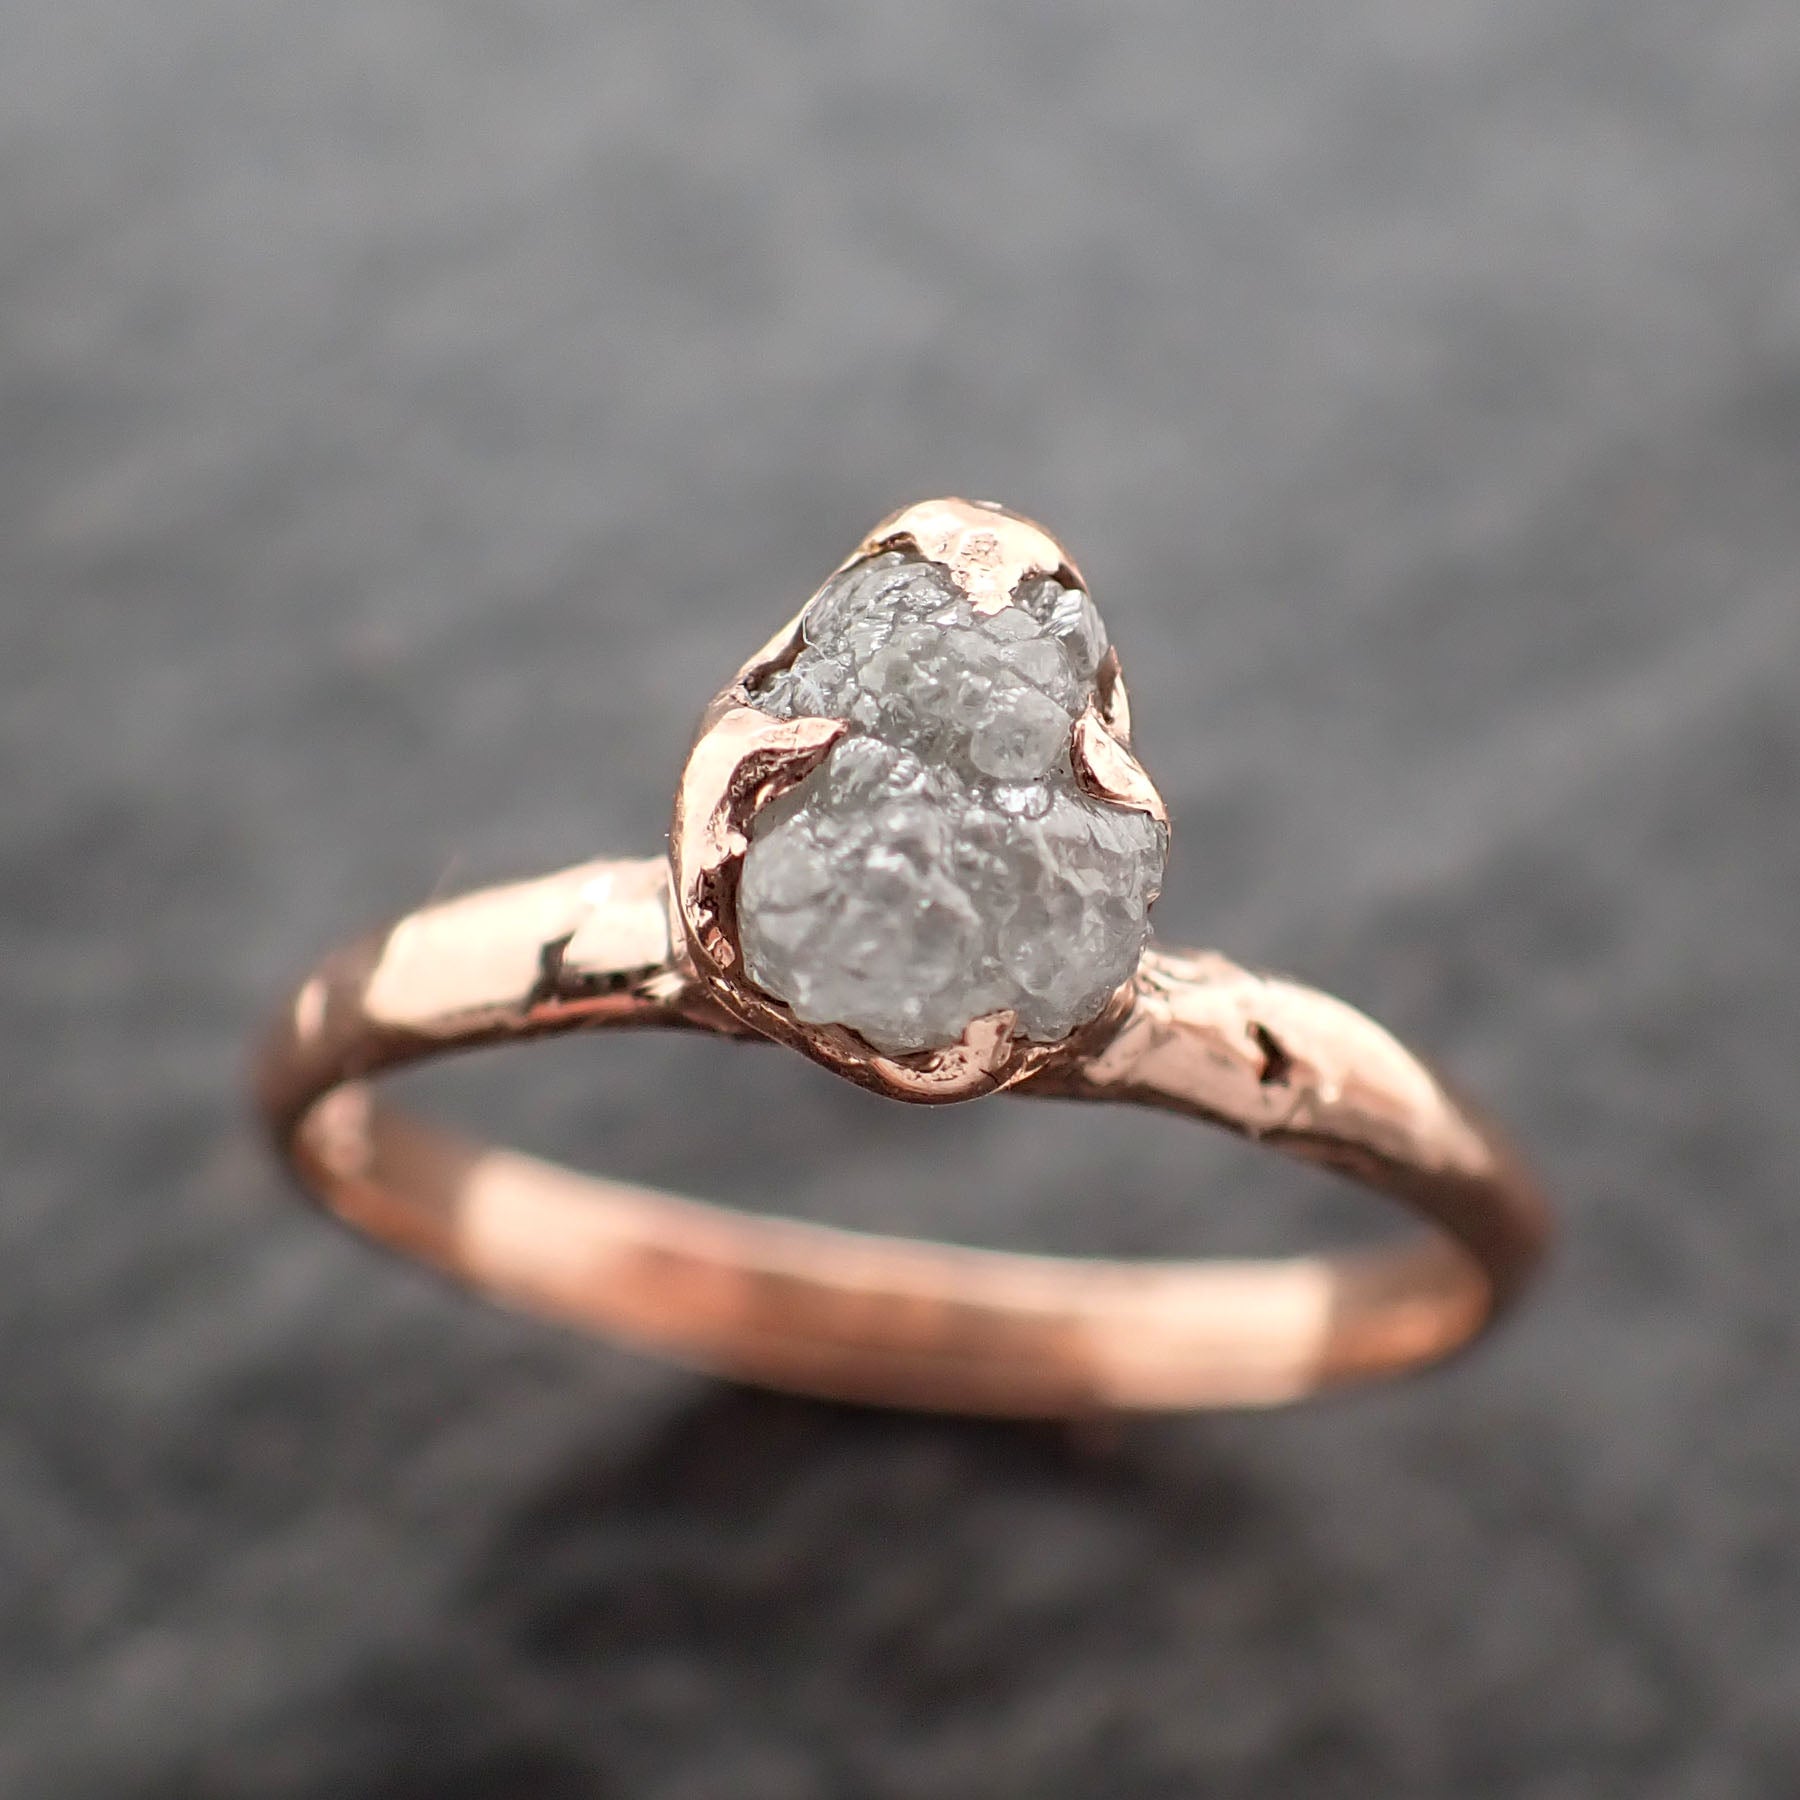 raw diamond engagement ring rough uncut diamond solitaire recycled 14k rose gold conflict free diamond wedding promise 2744 Alternative Engagement